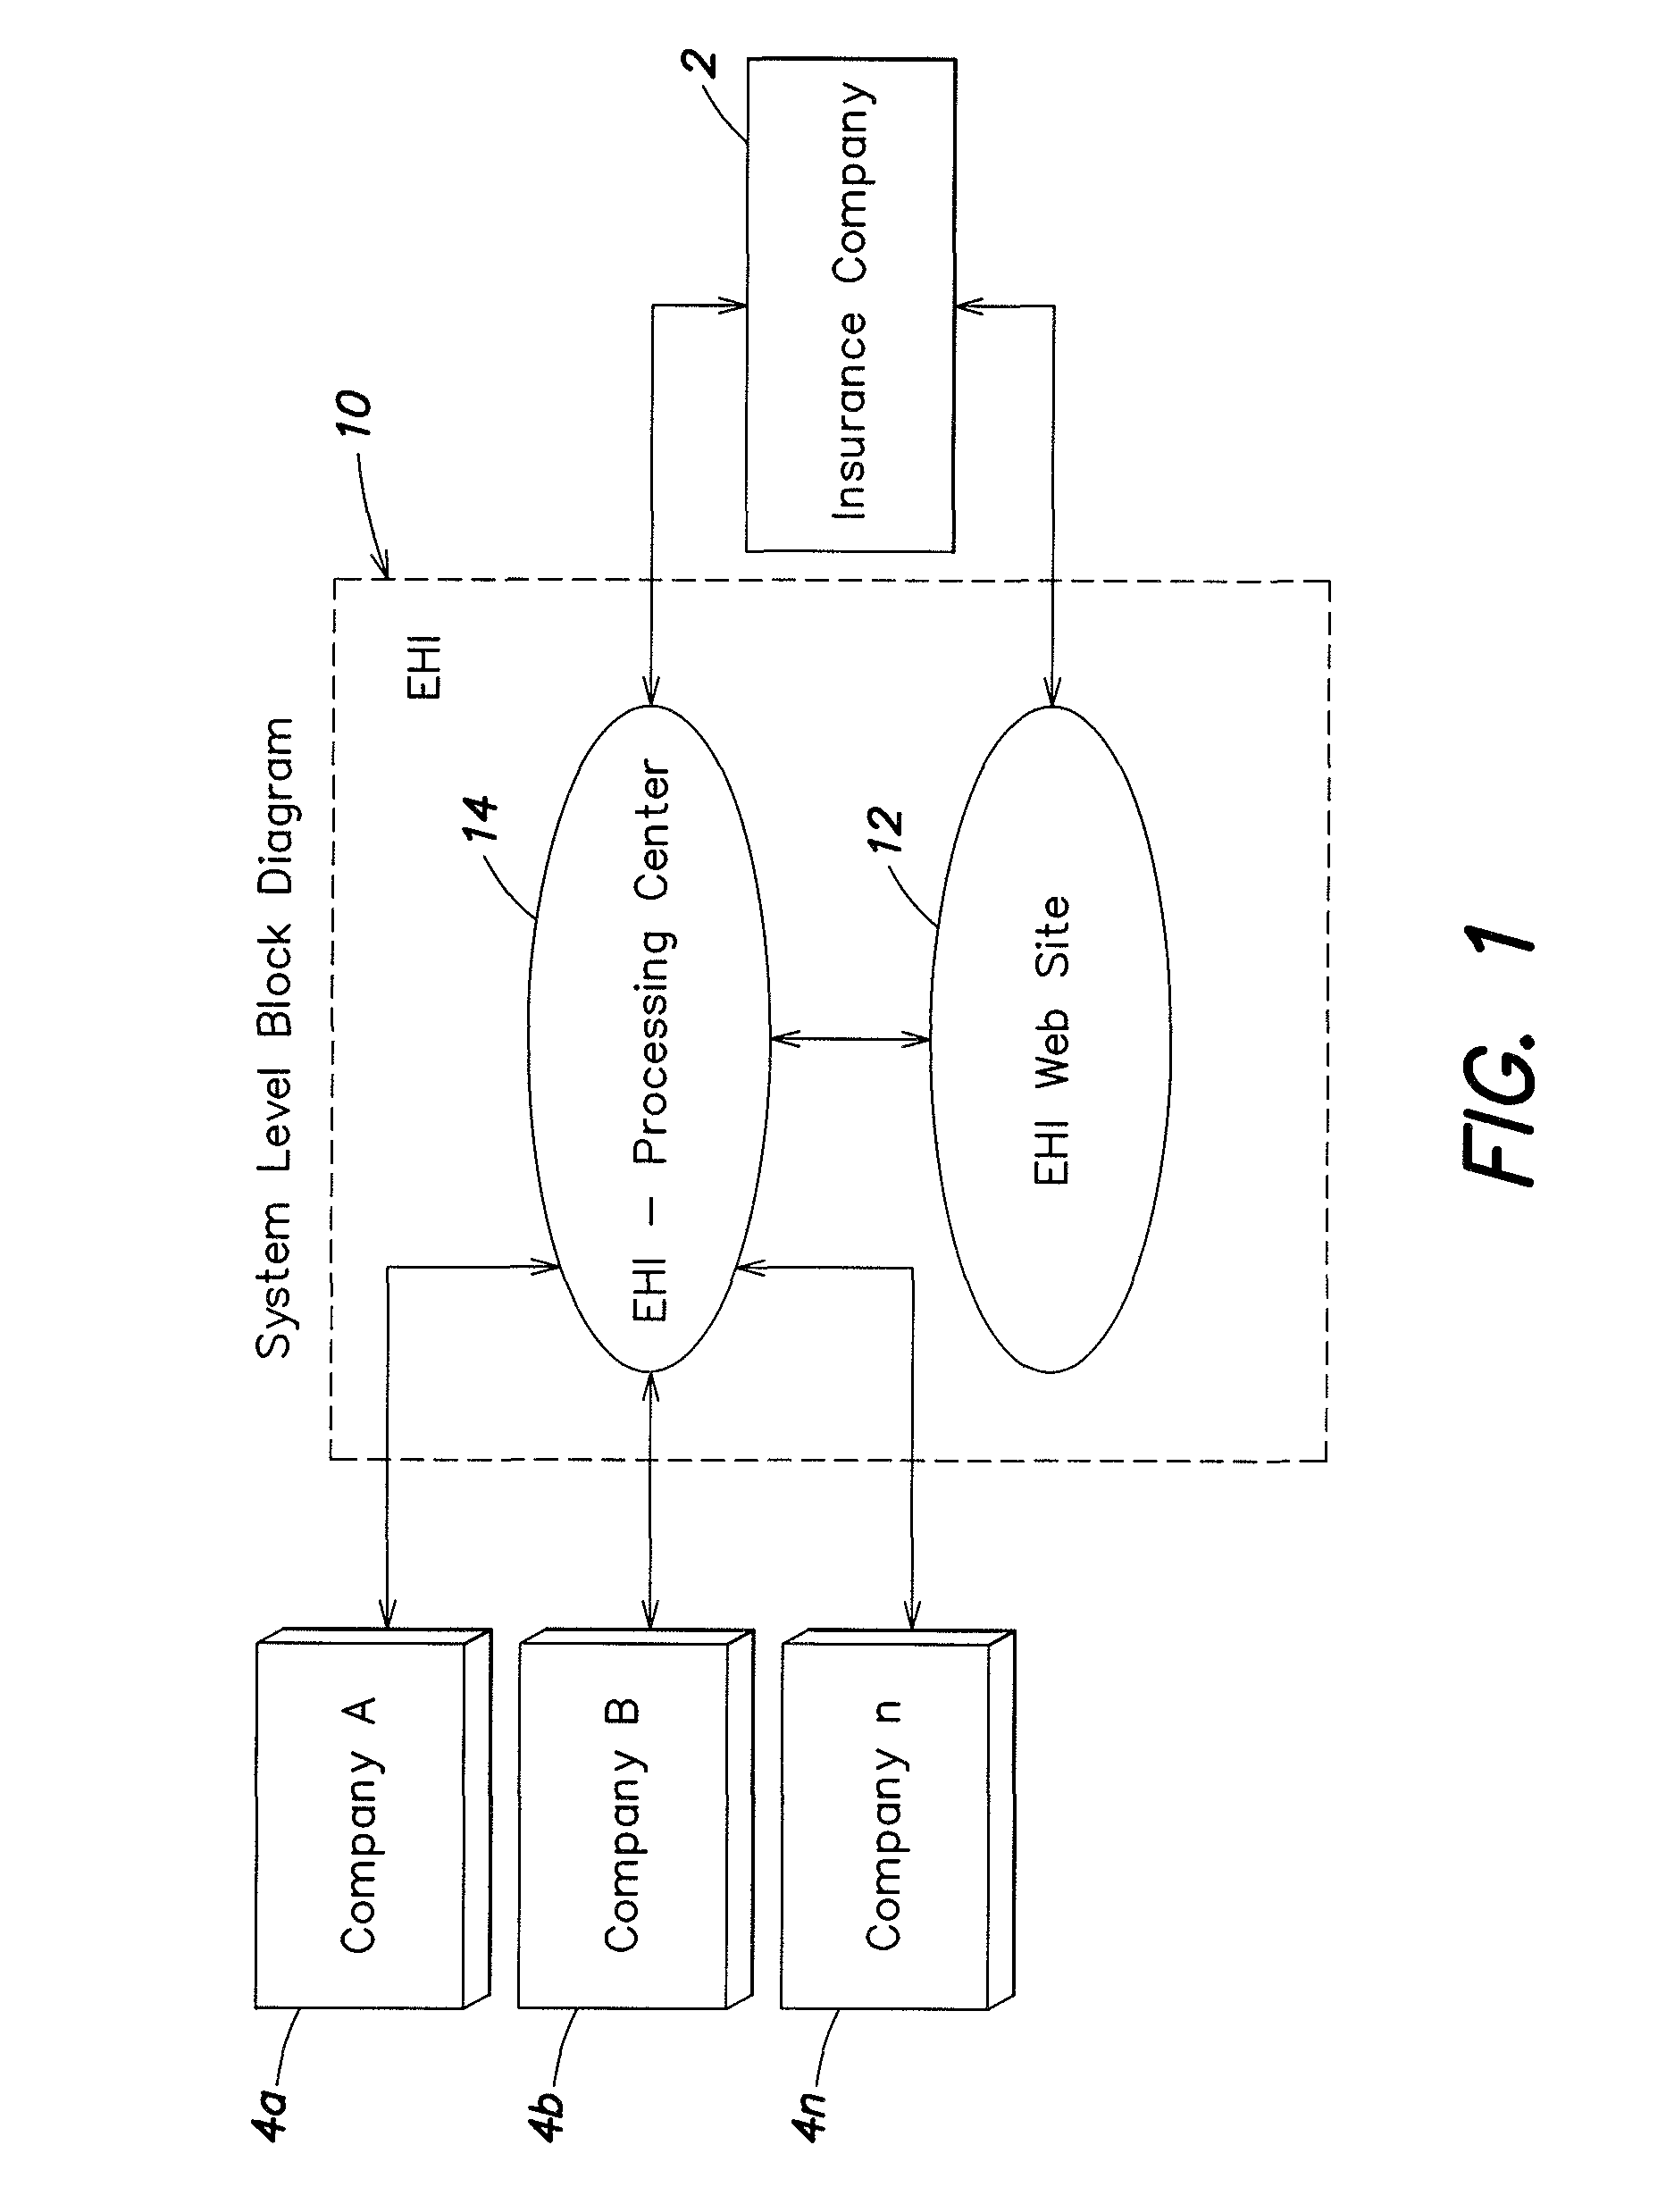 Method and system for obtaining health-related records and documents using an online location